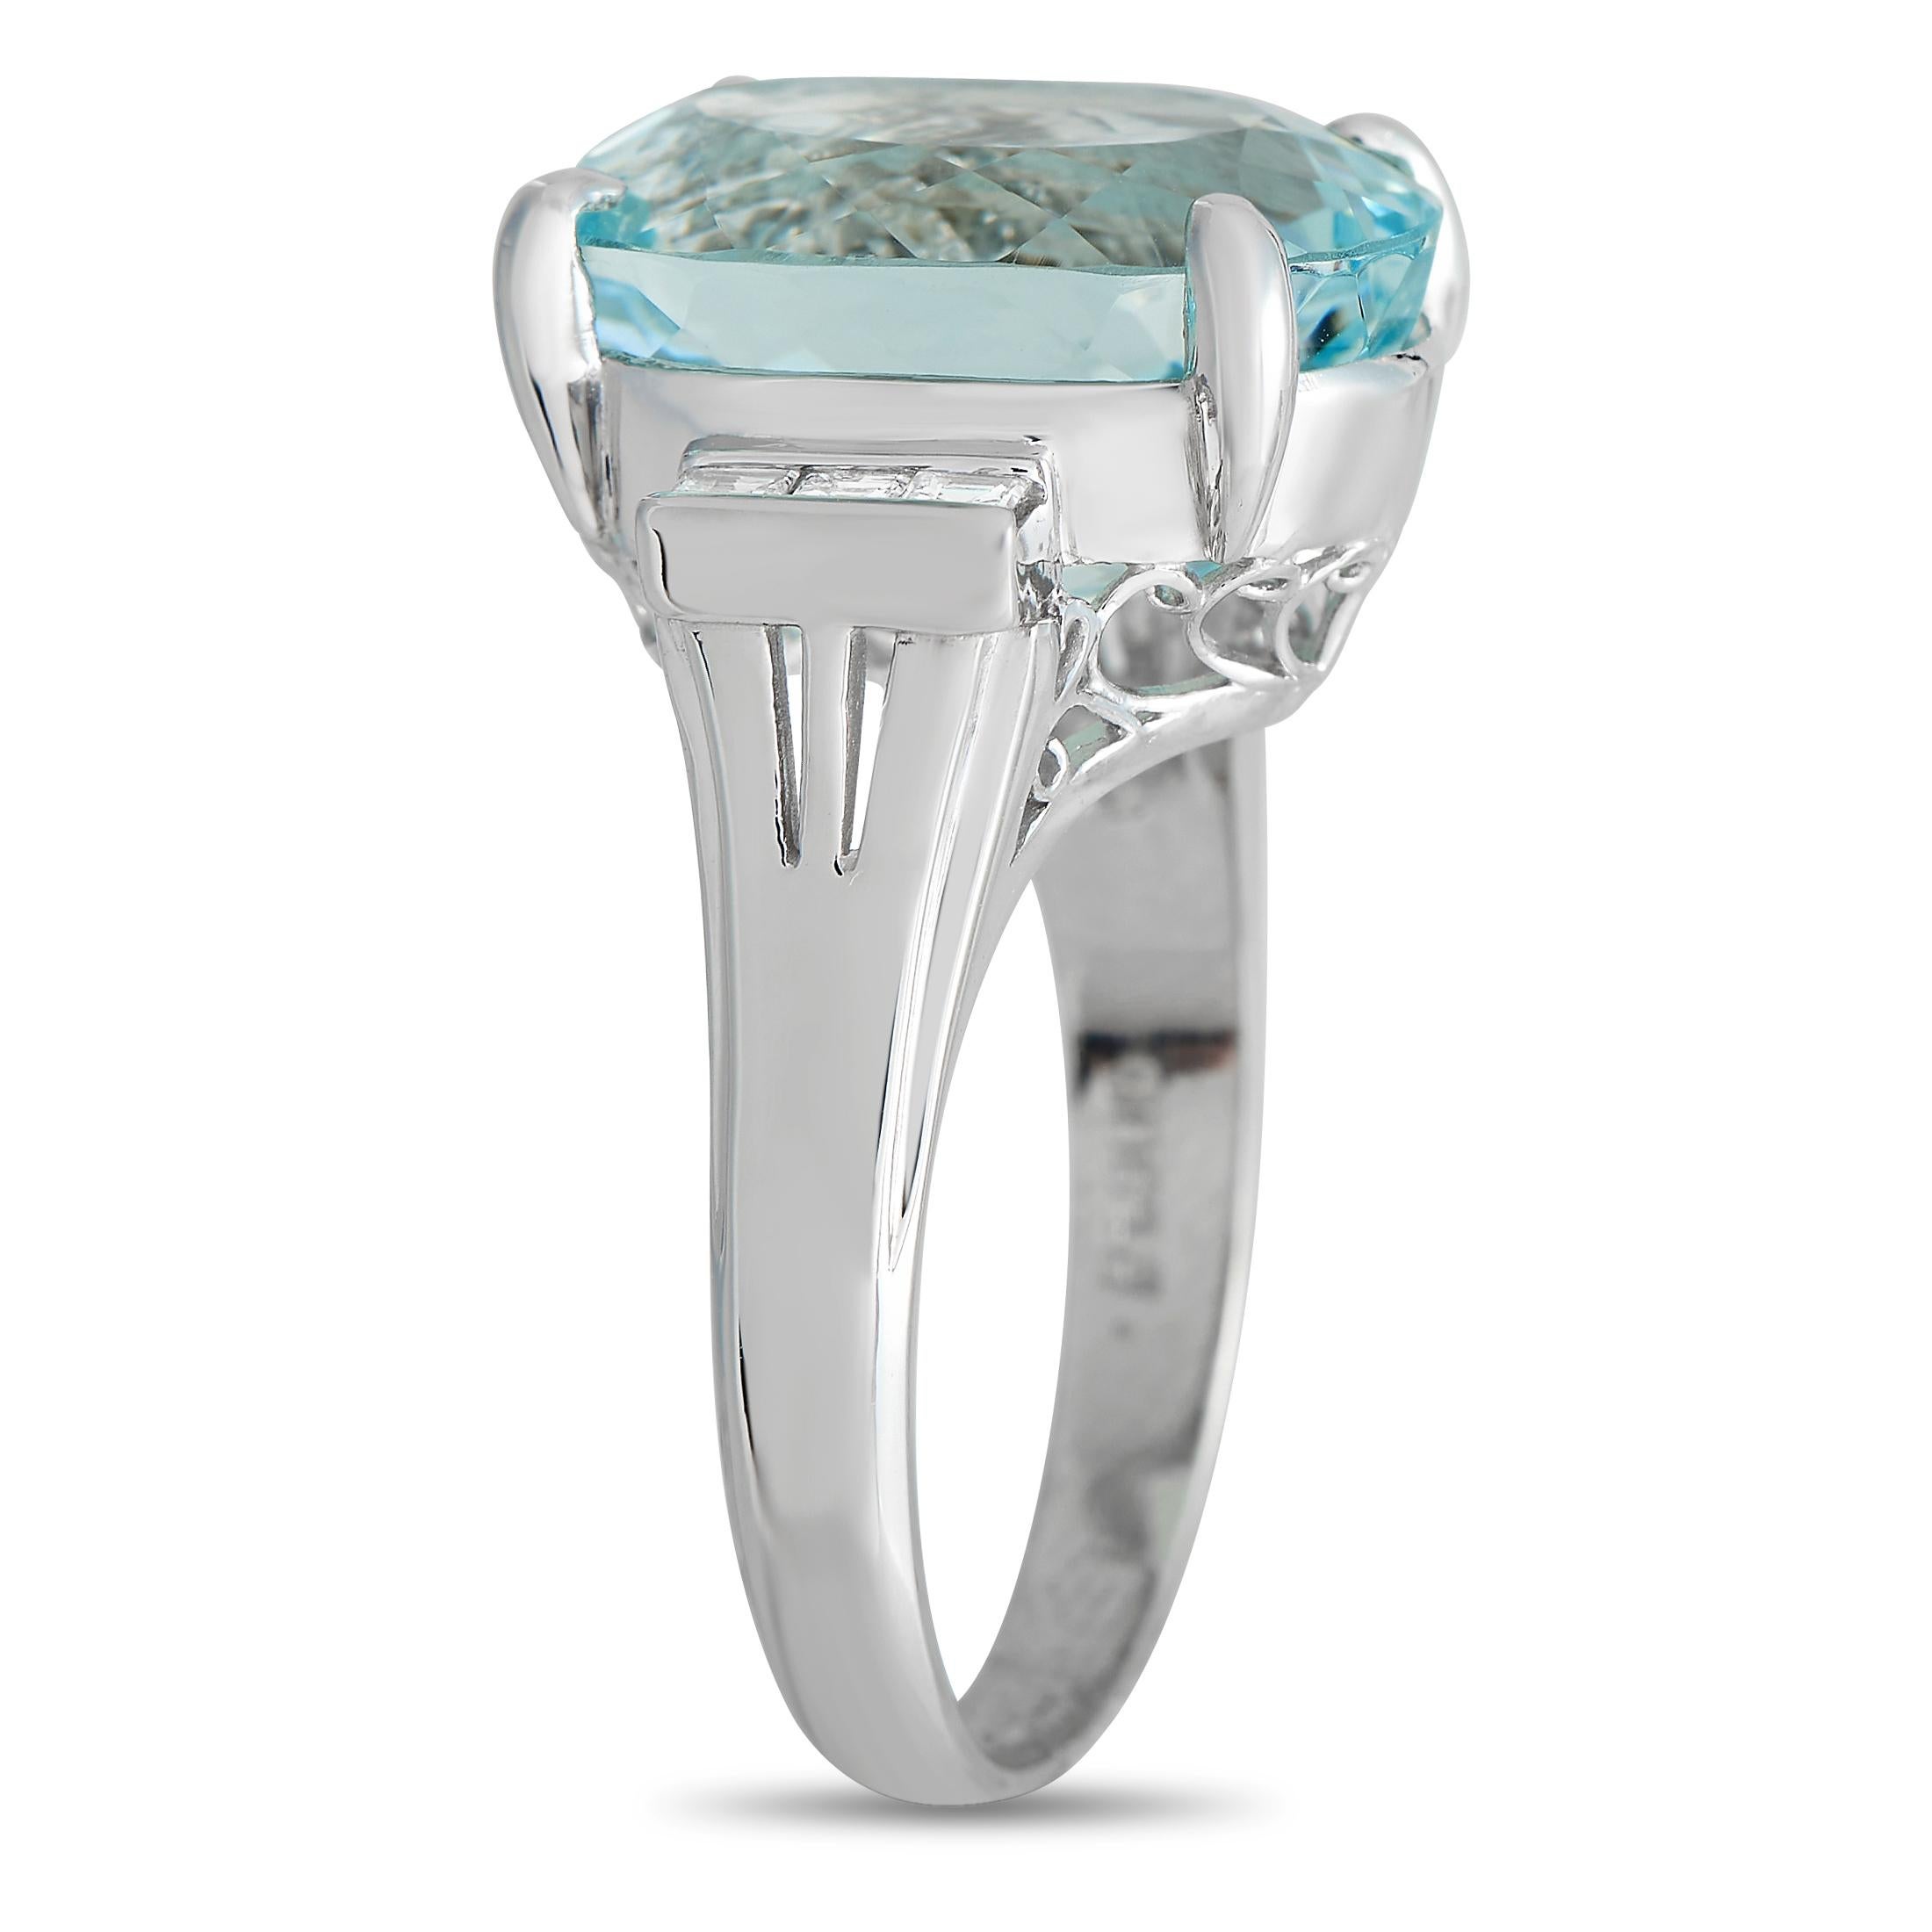 This luxurious ring will serve as an exquisite addition to any luxury jewelry collection. An intricate Platinum setting provides the perfect backdrop for this ring’s stunning array of gemstones, which include diamond accents totaling 0.24 carats and